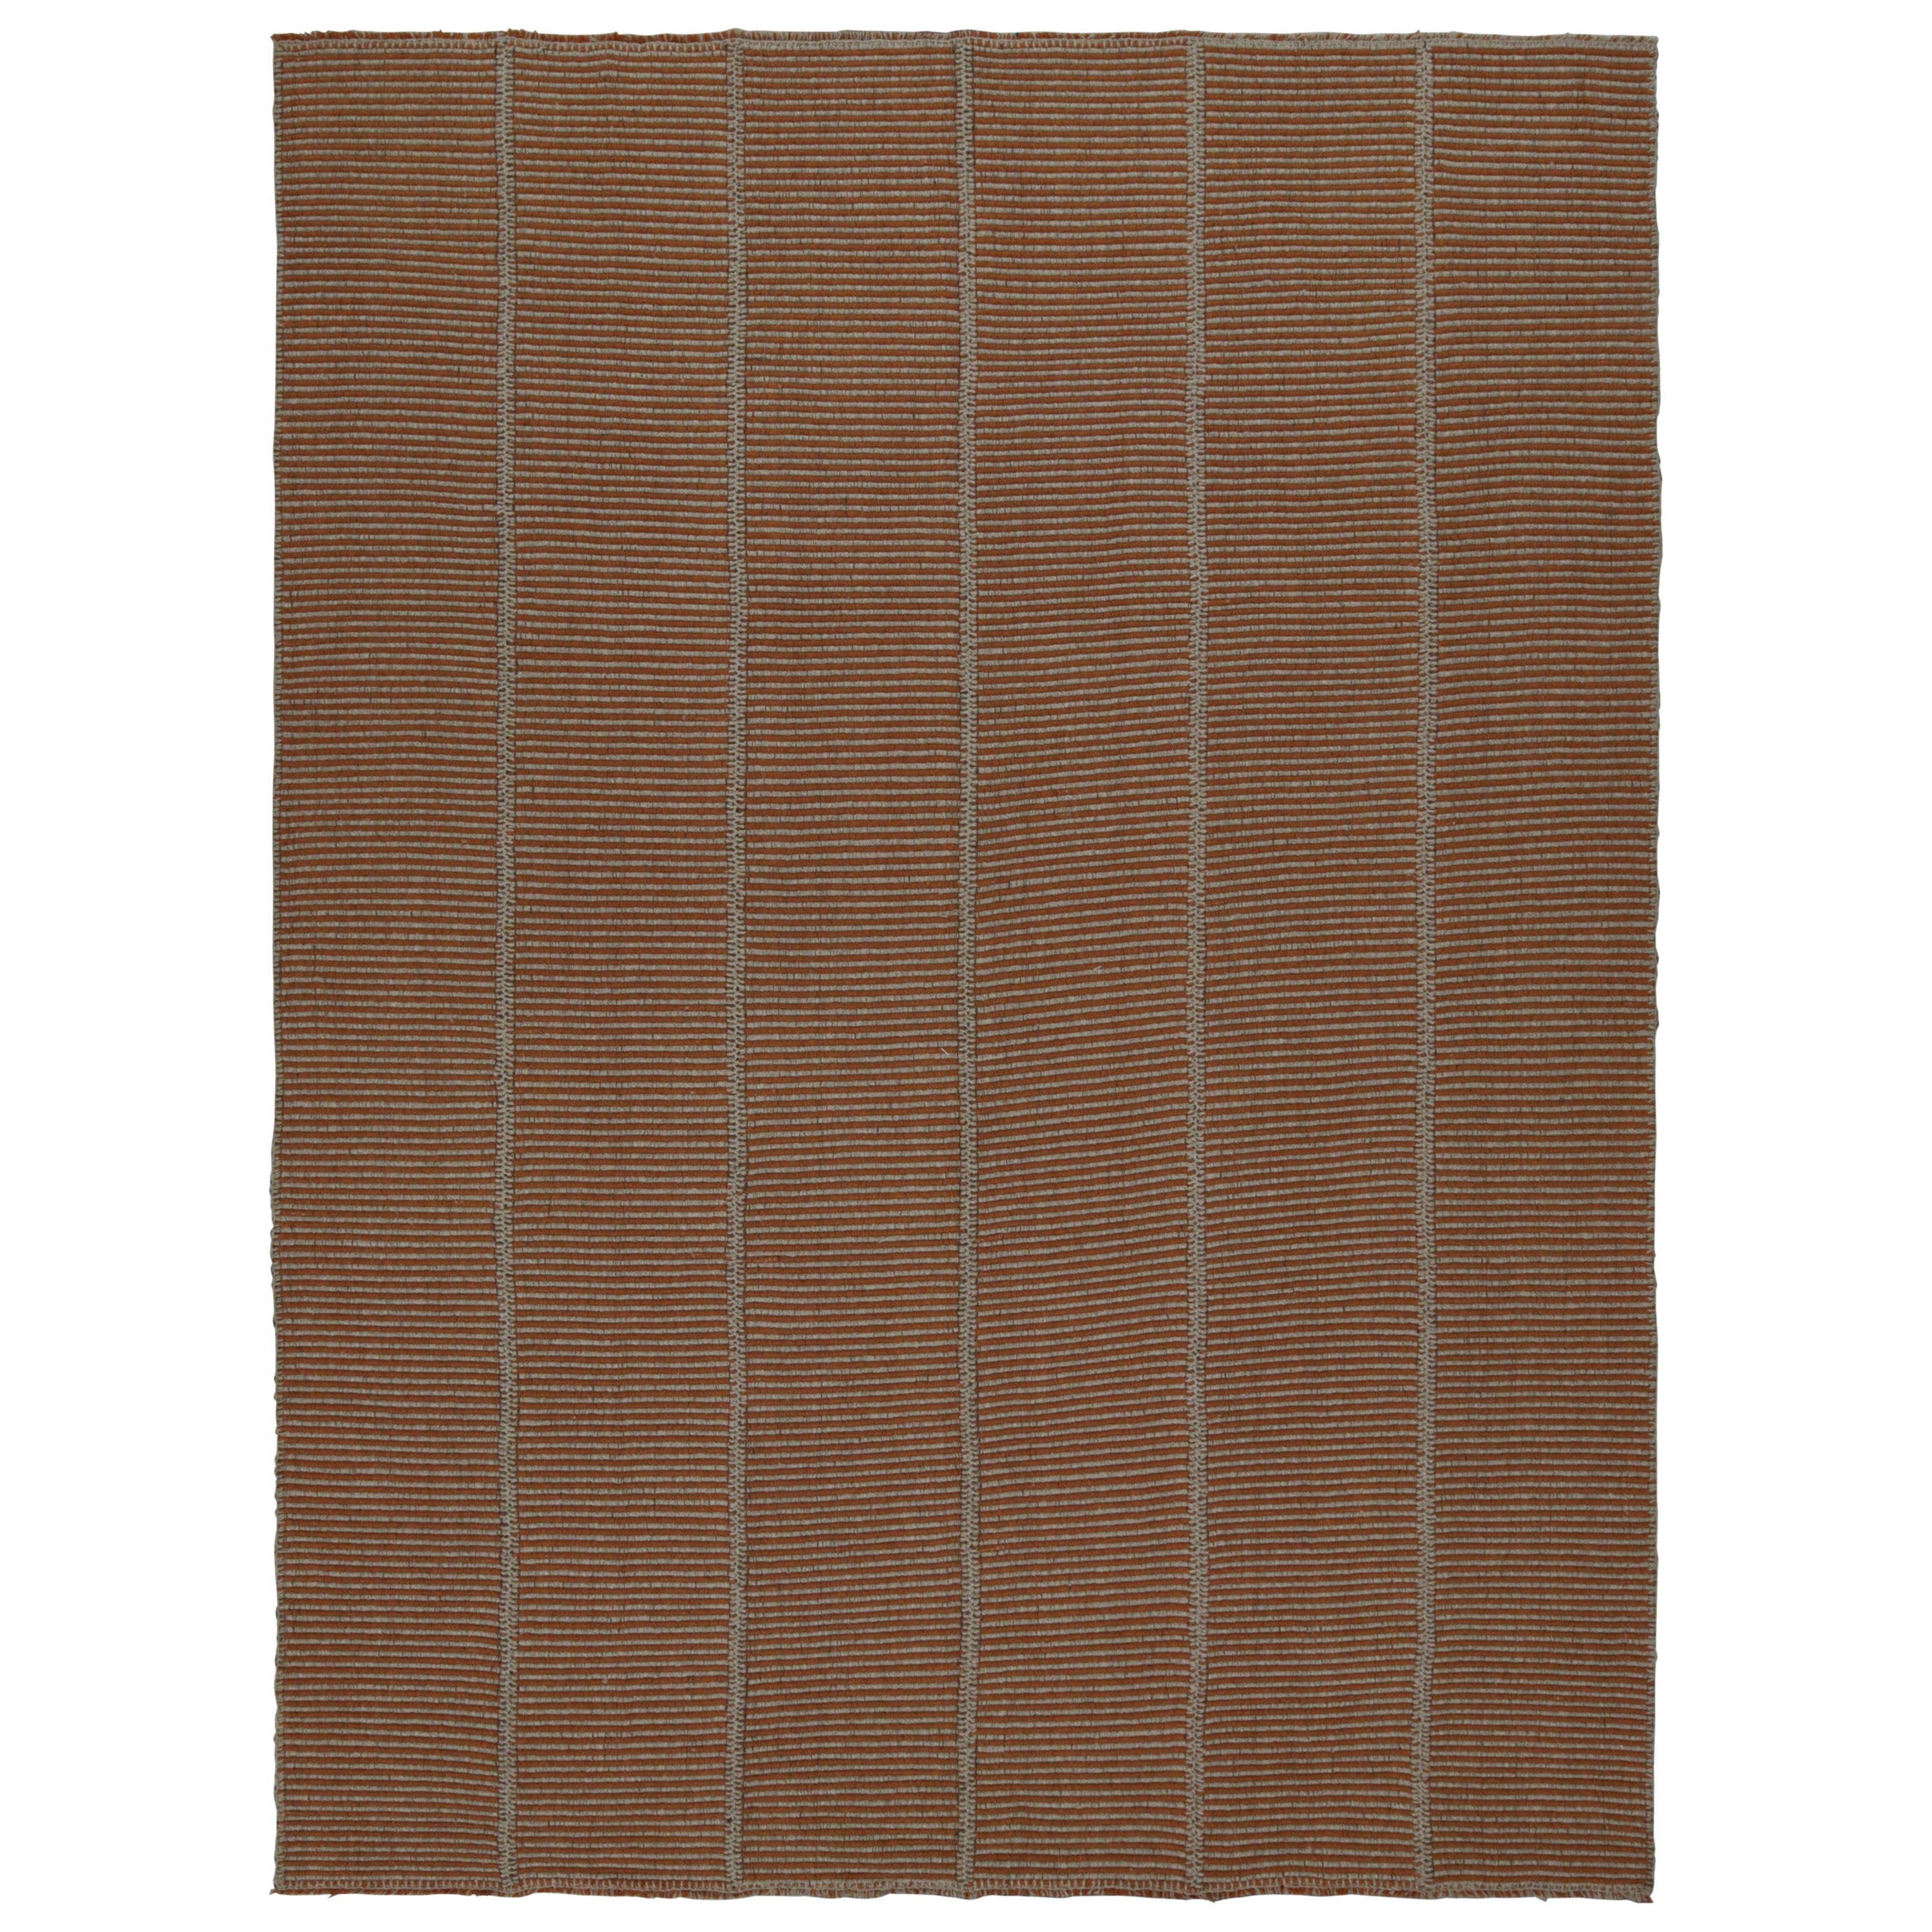 Rug & Kilim’s Contemporary Kilim with Rust Tone Orange and Beige Stripes For Sale